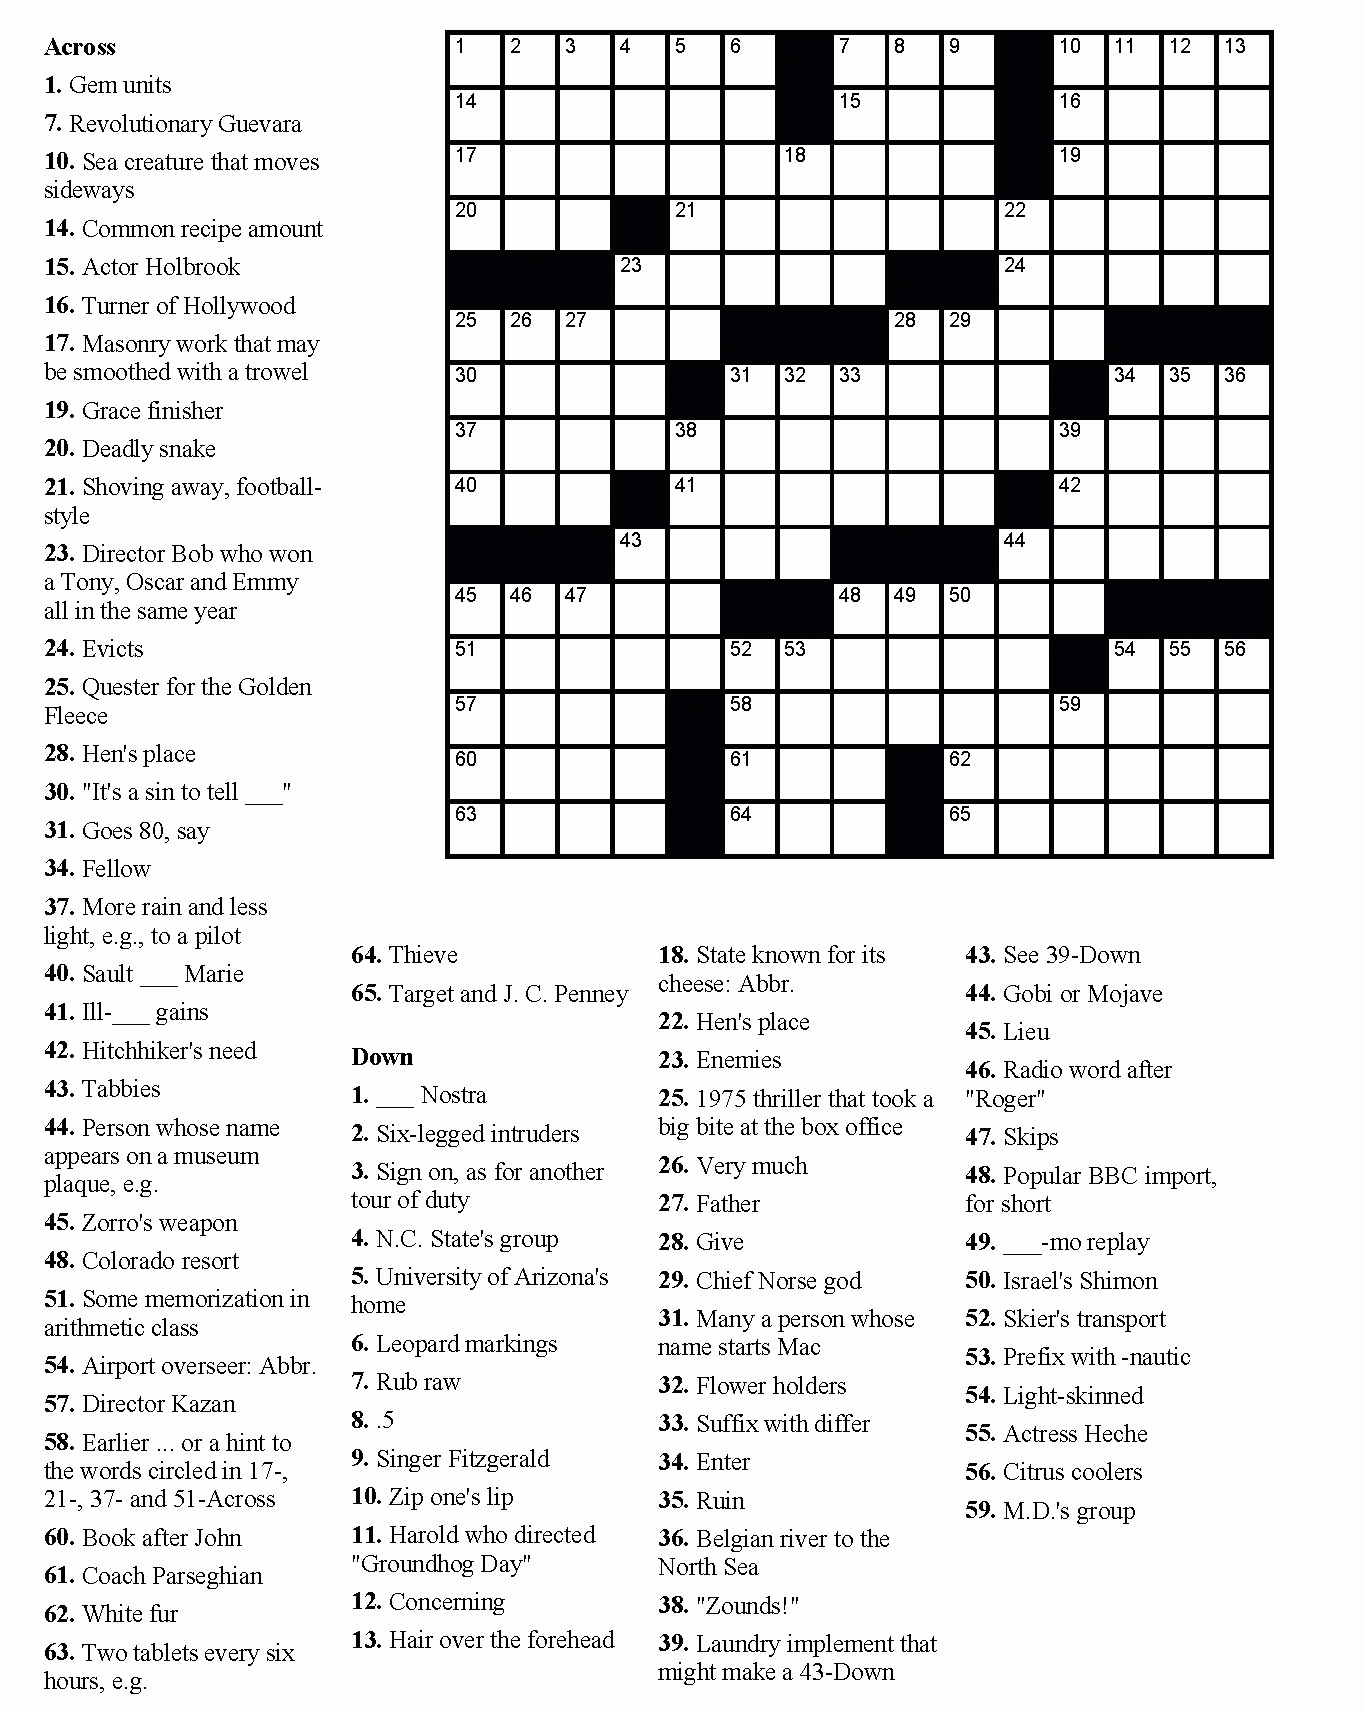 Free Printable Crossword Puzzles Easy For Adults | My Board - Free - Printable Puzzles Easy